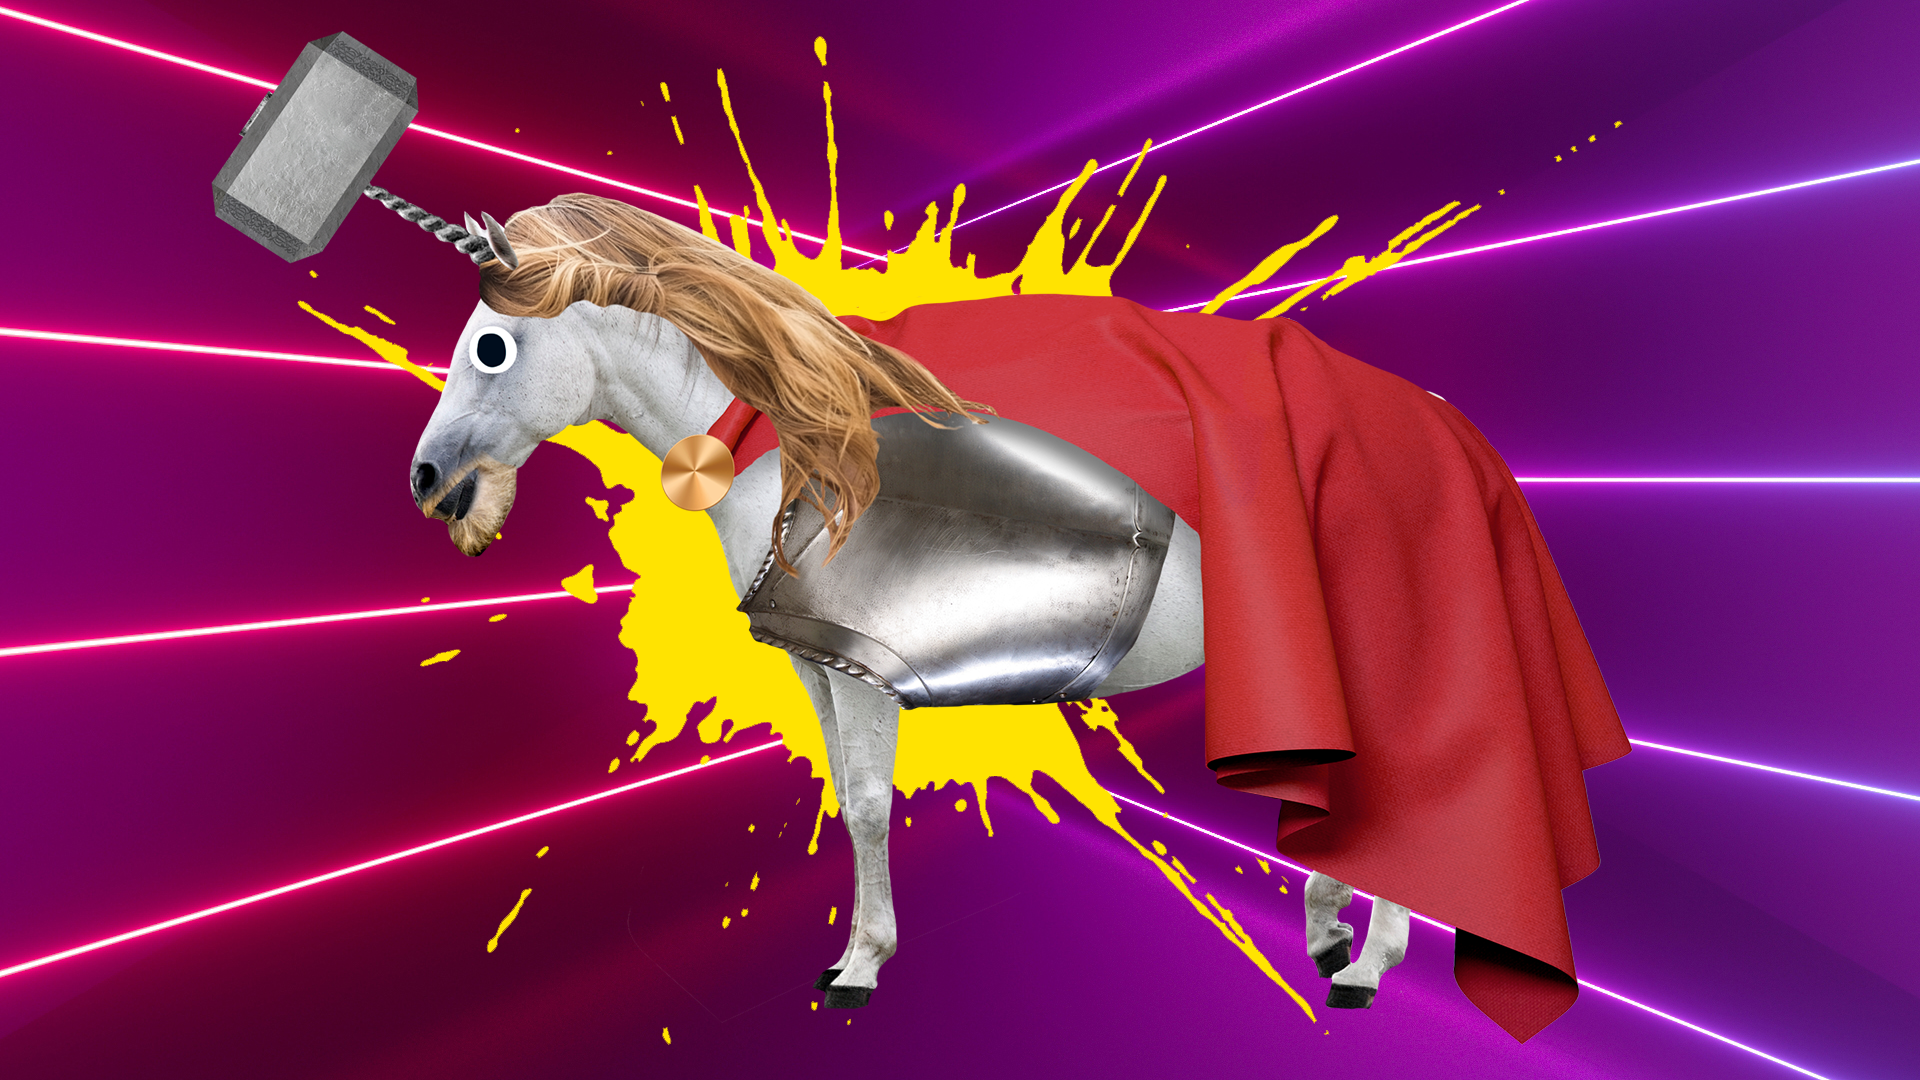 Laser background with thor horse